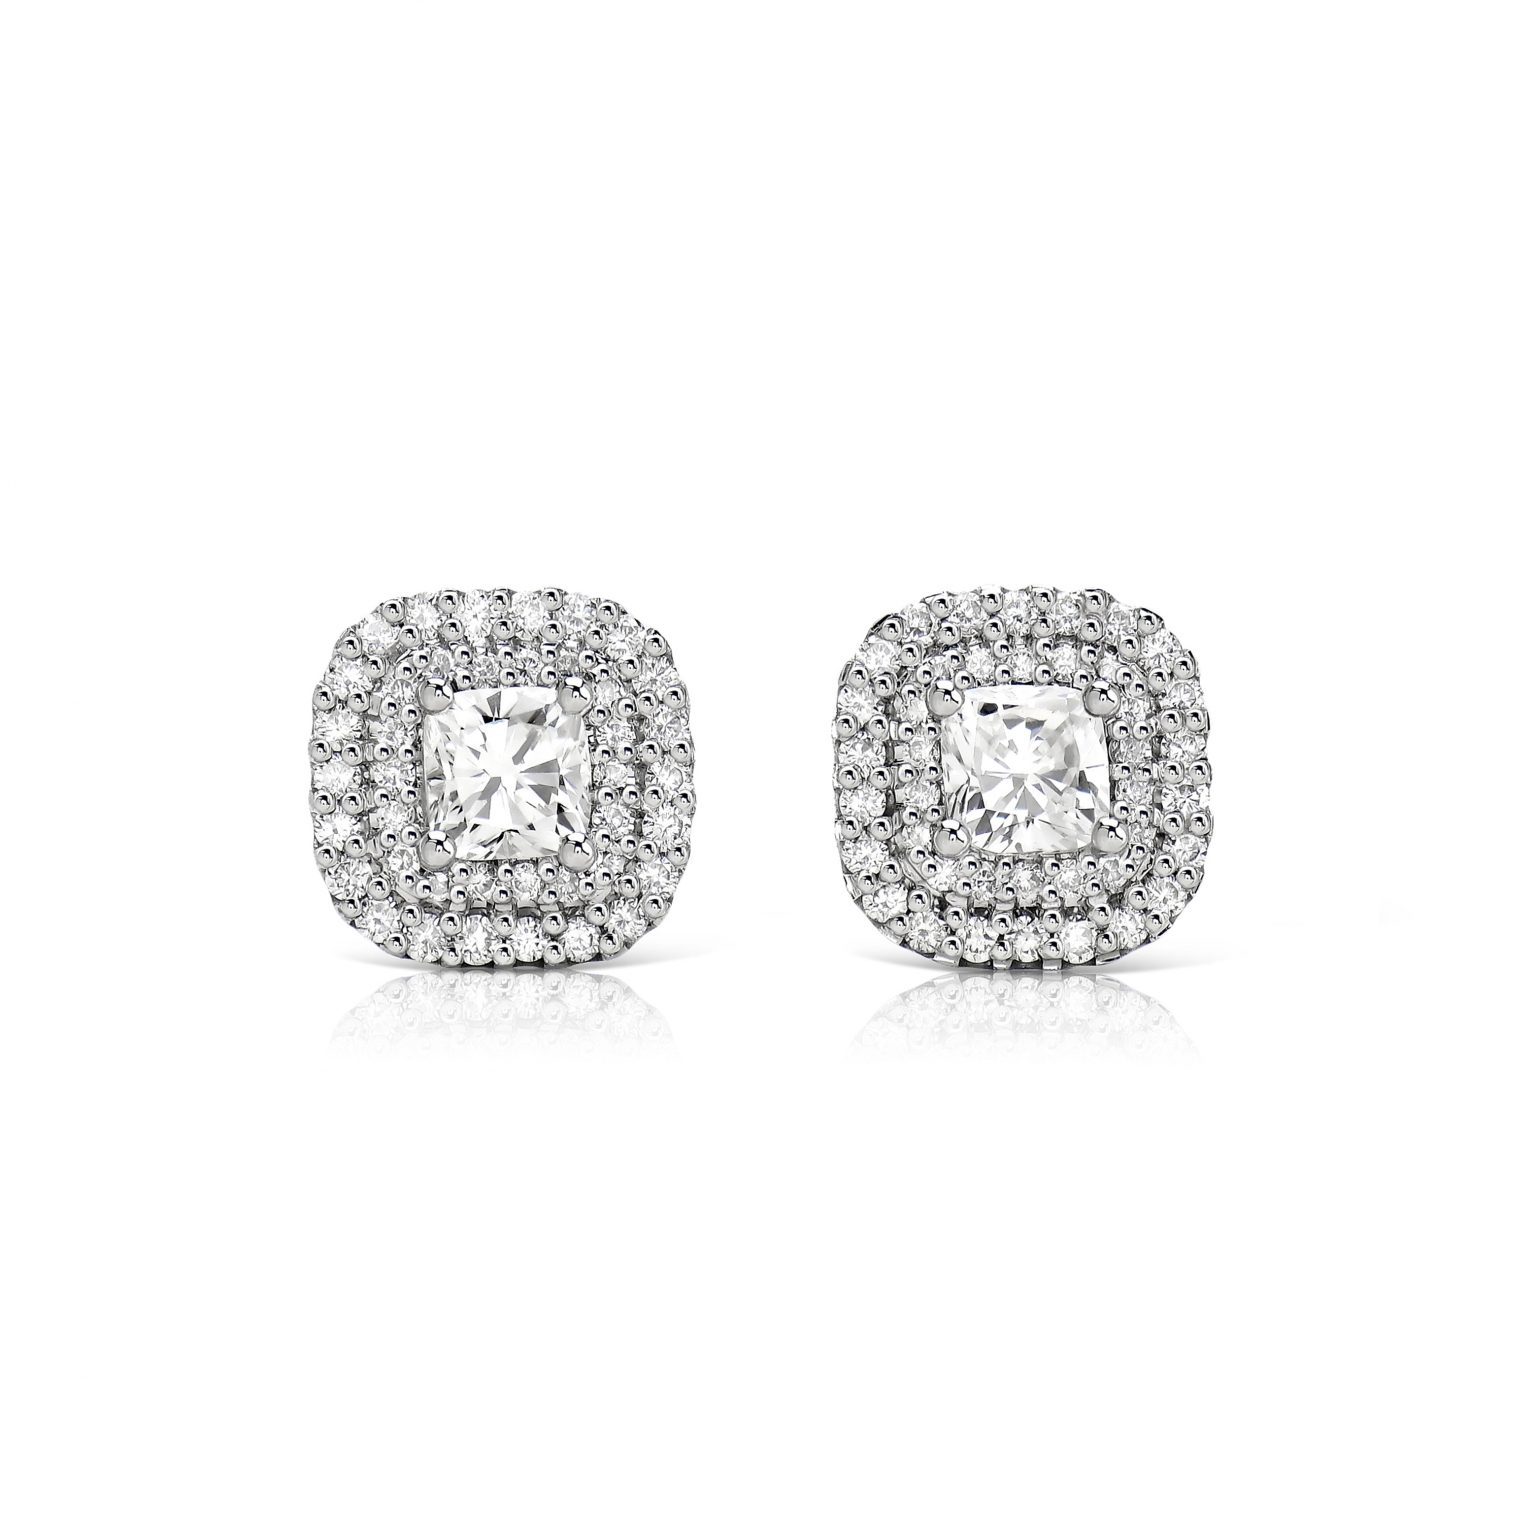 Diamond stud earrings with a total weight of 2.18 ct